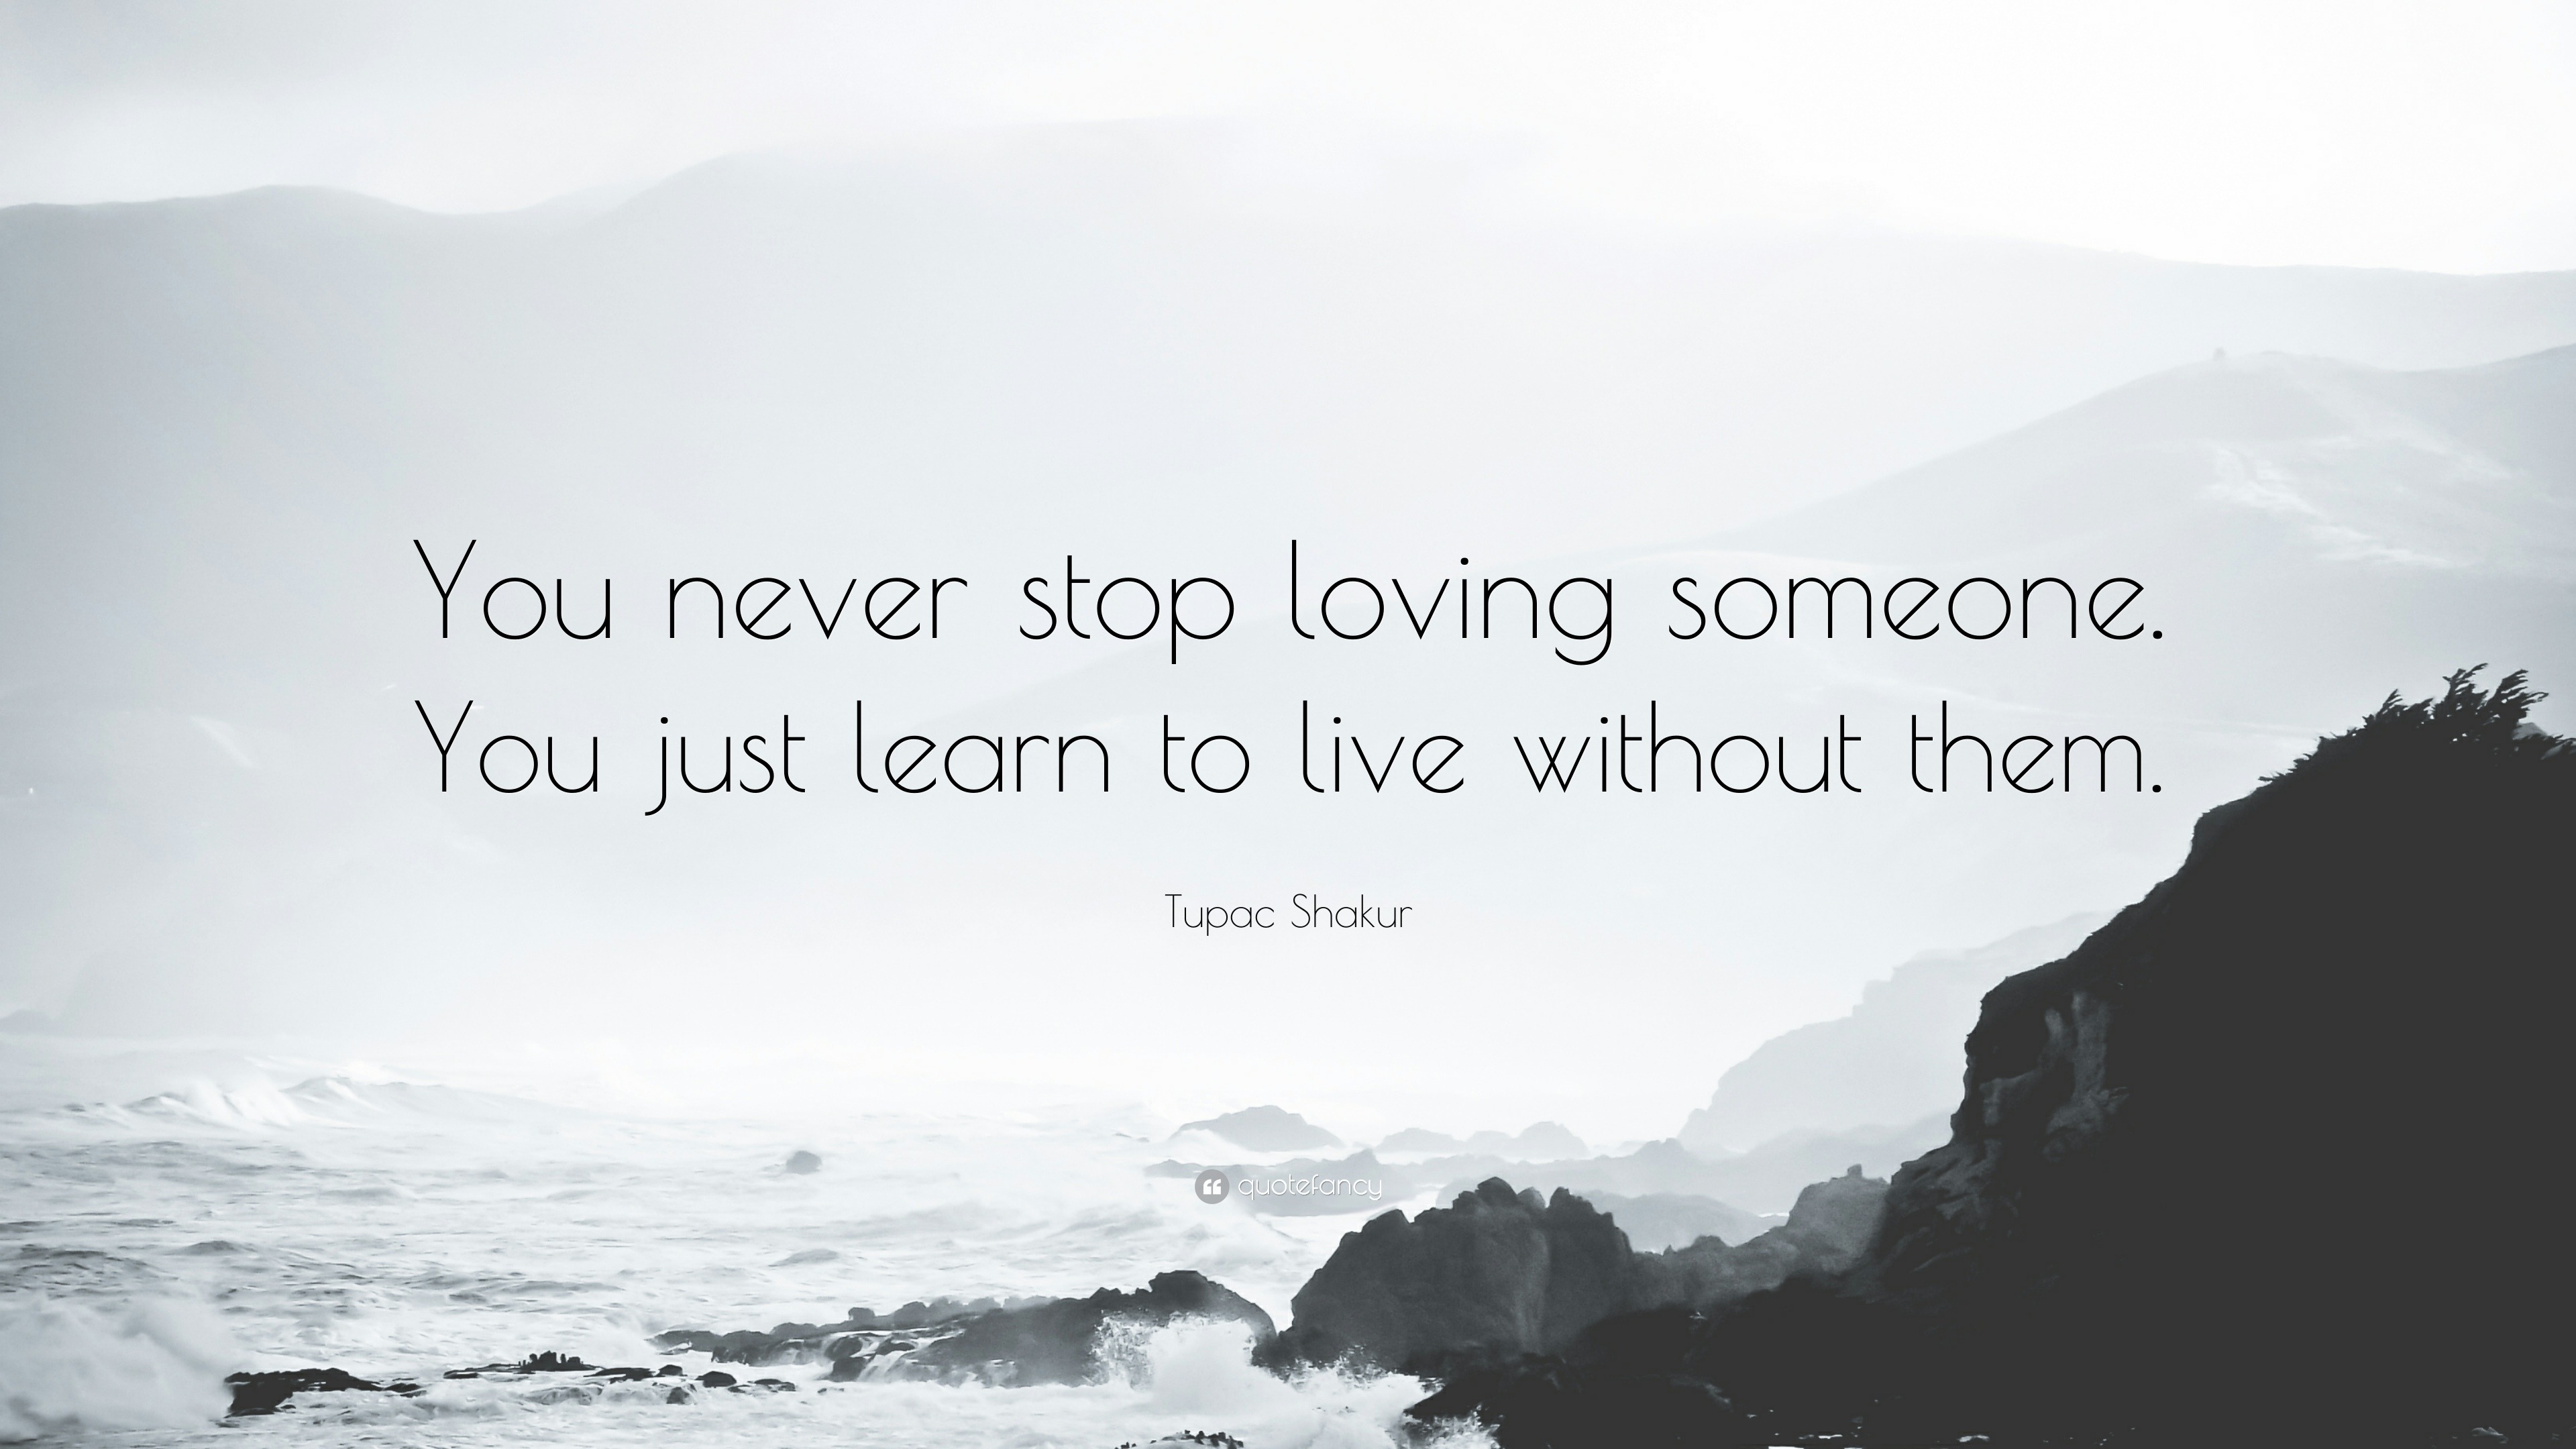 Tupac Shakur Quote “You never stop loving someone You just learn to live